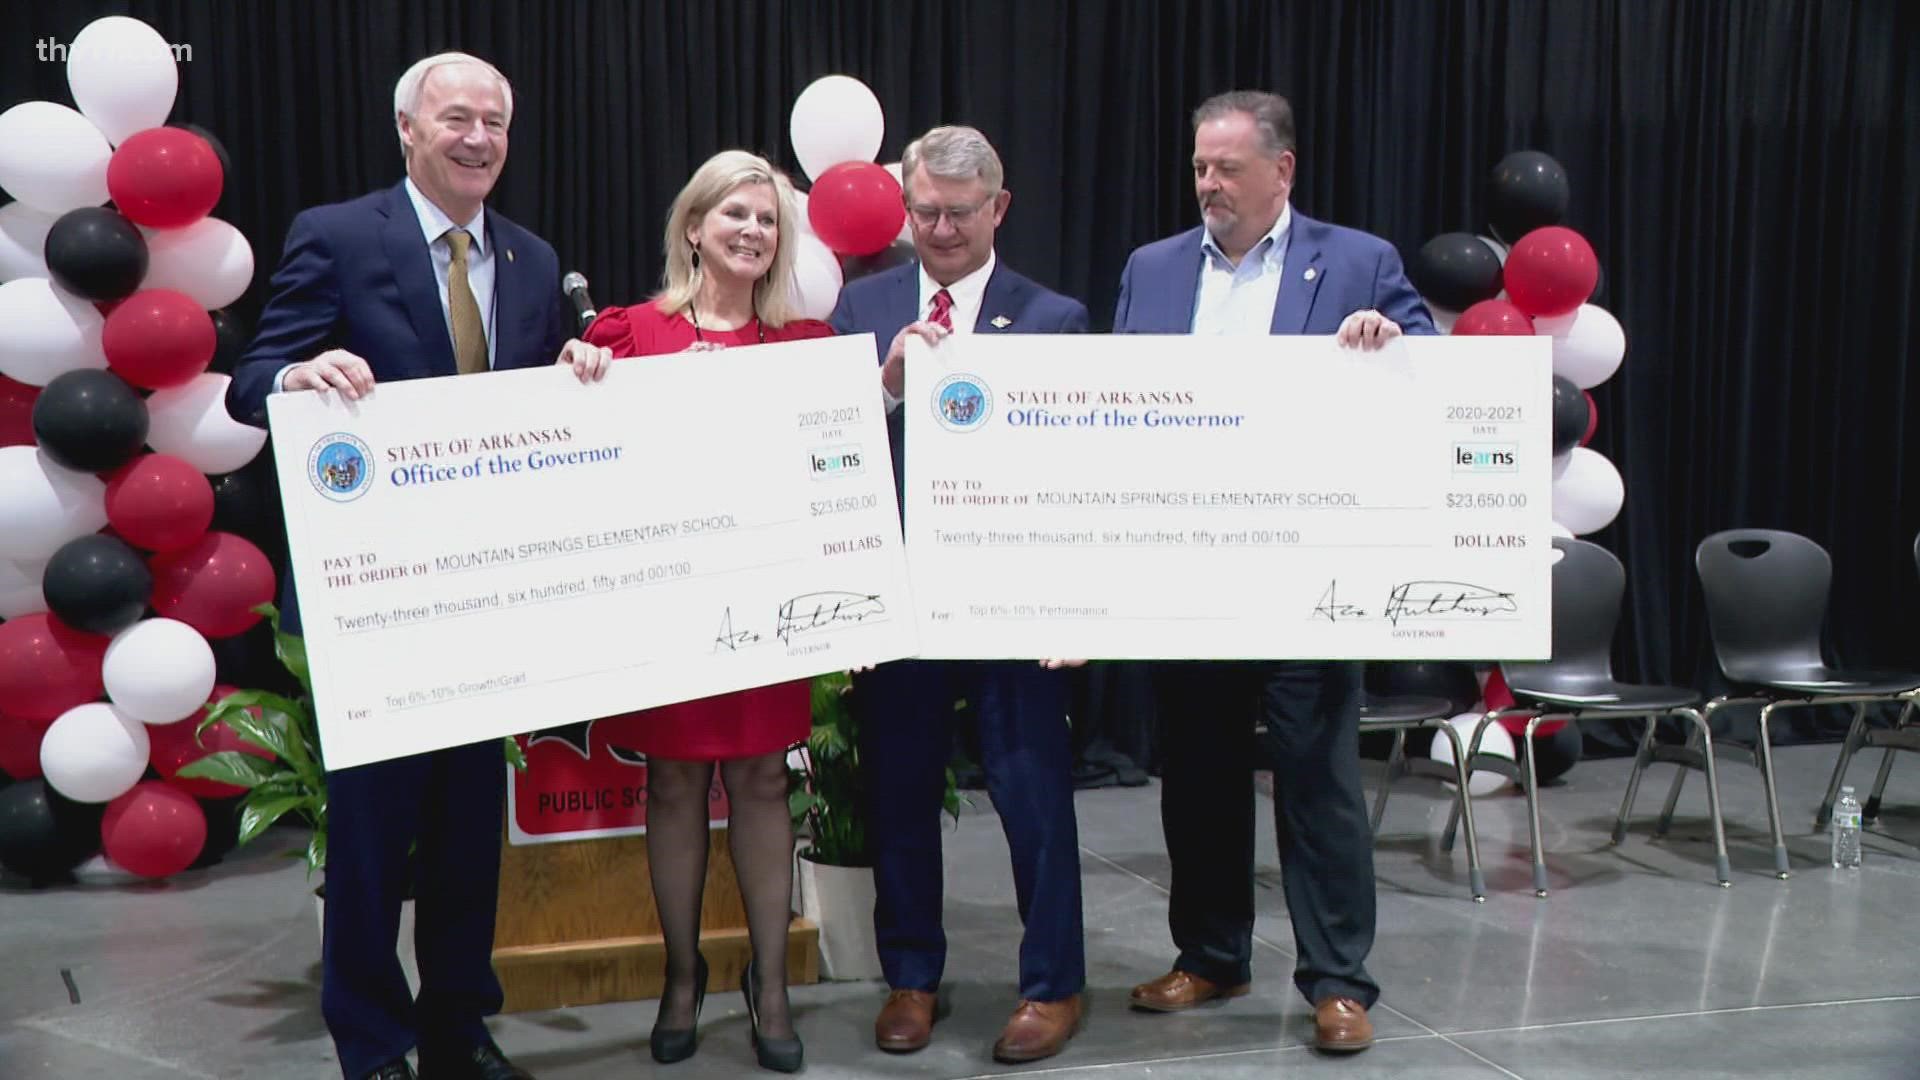 Gov. Asa Hutchinson made a stop at Mountain Springs Elementary school, handing out nearly $170k for five Cabot elementary schools.